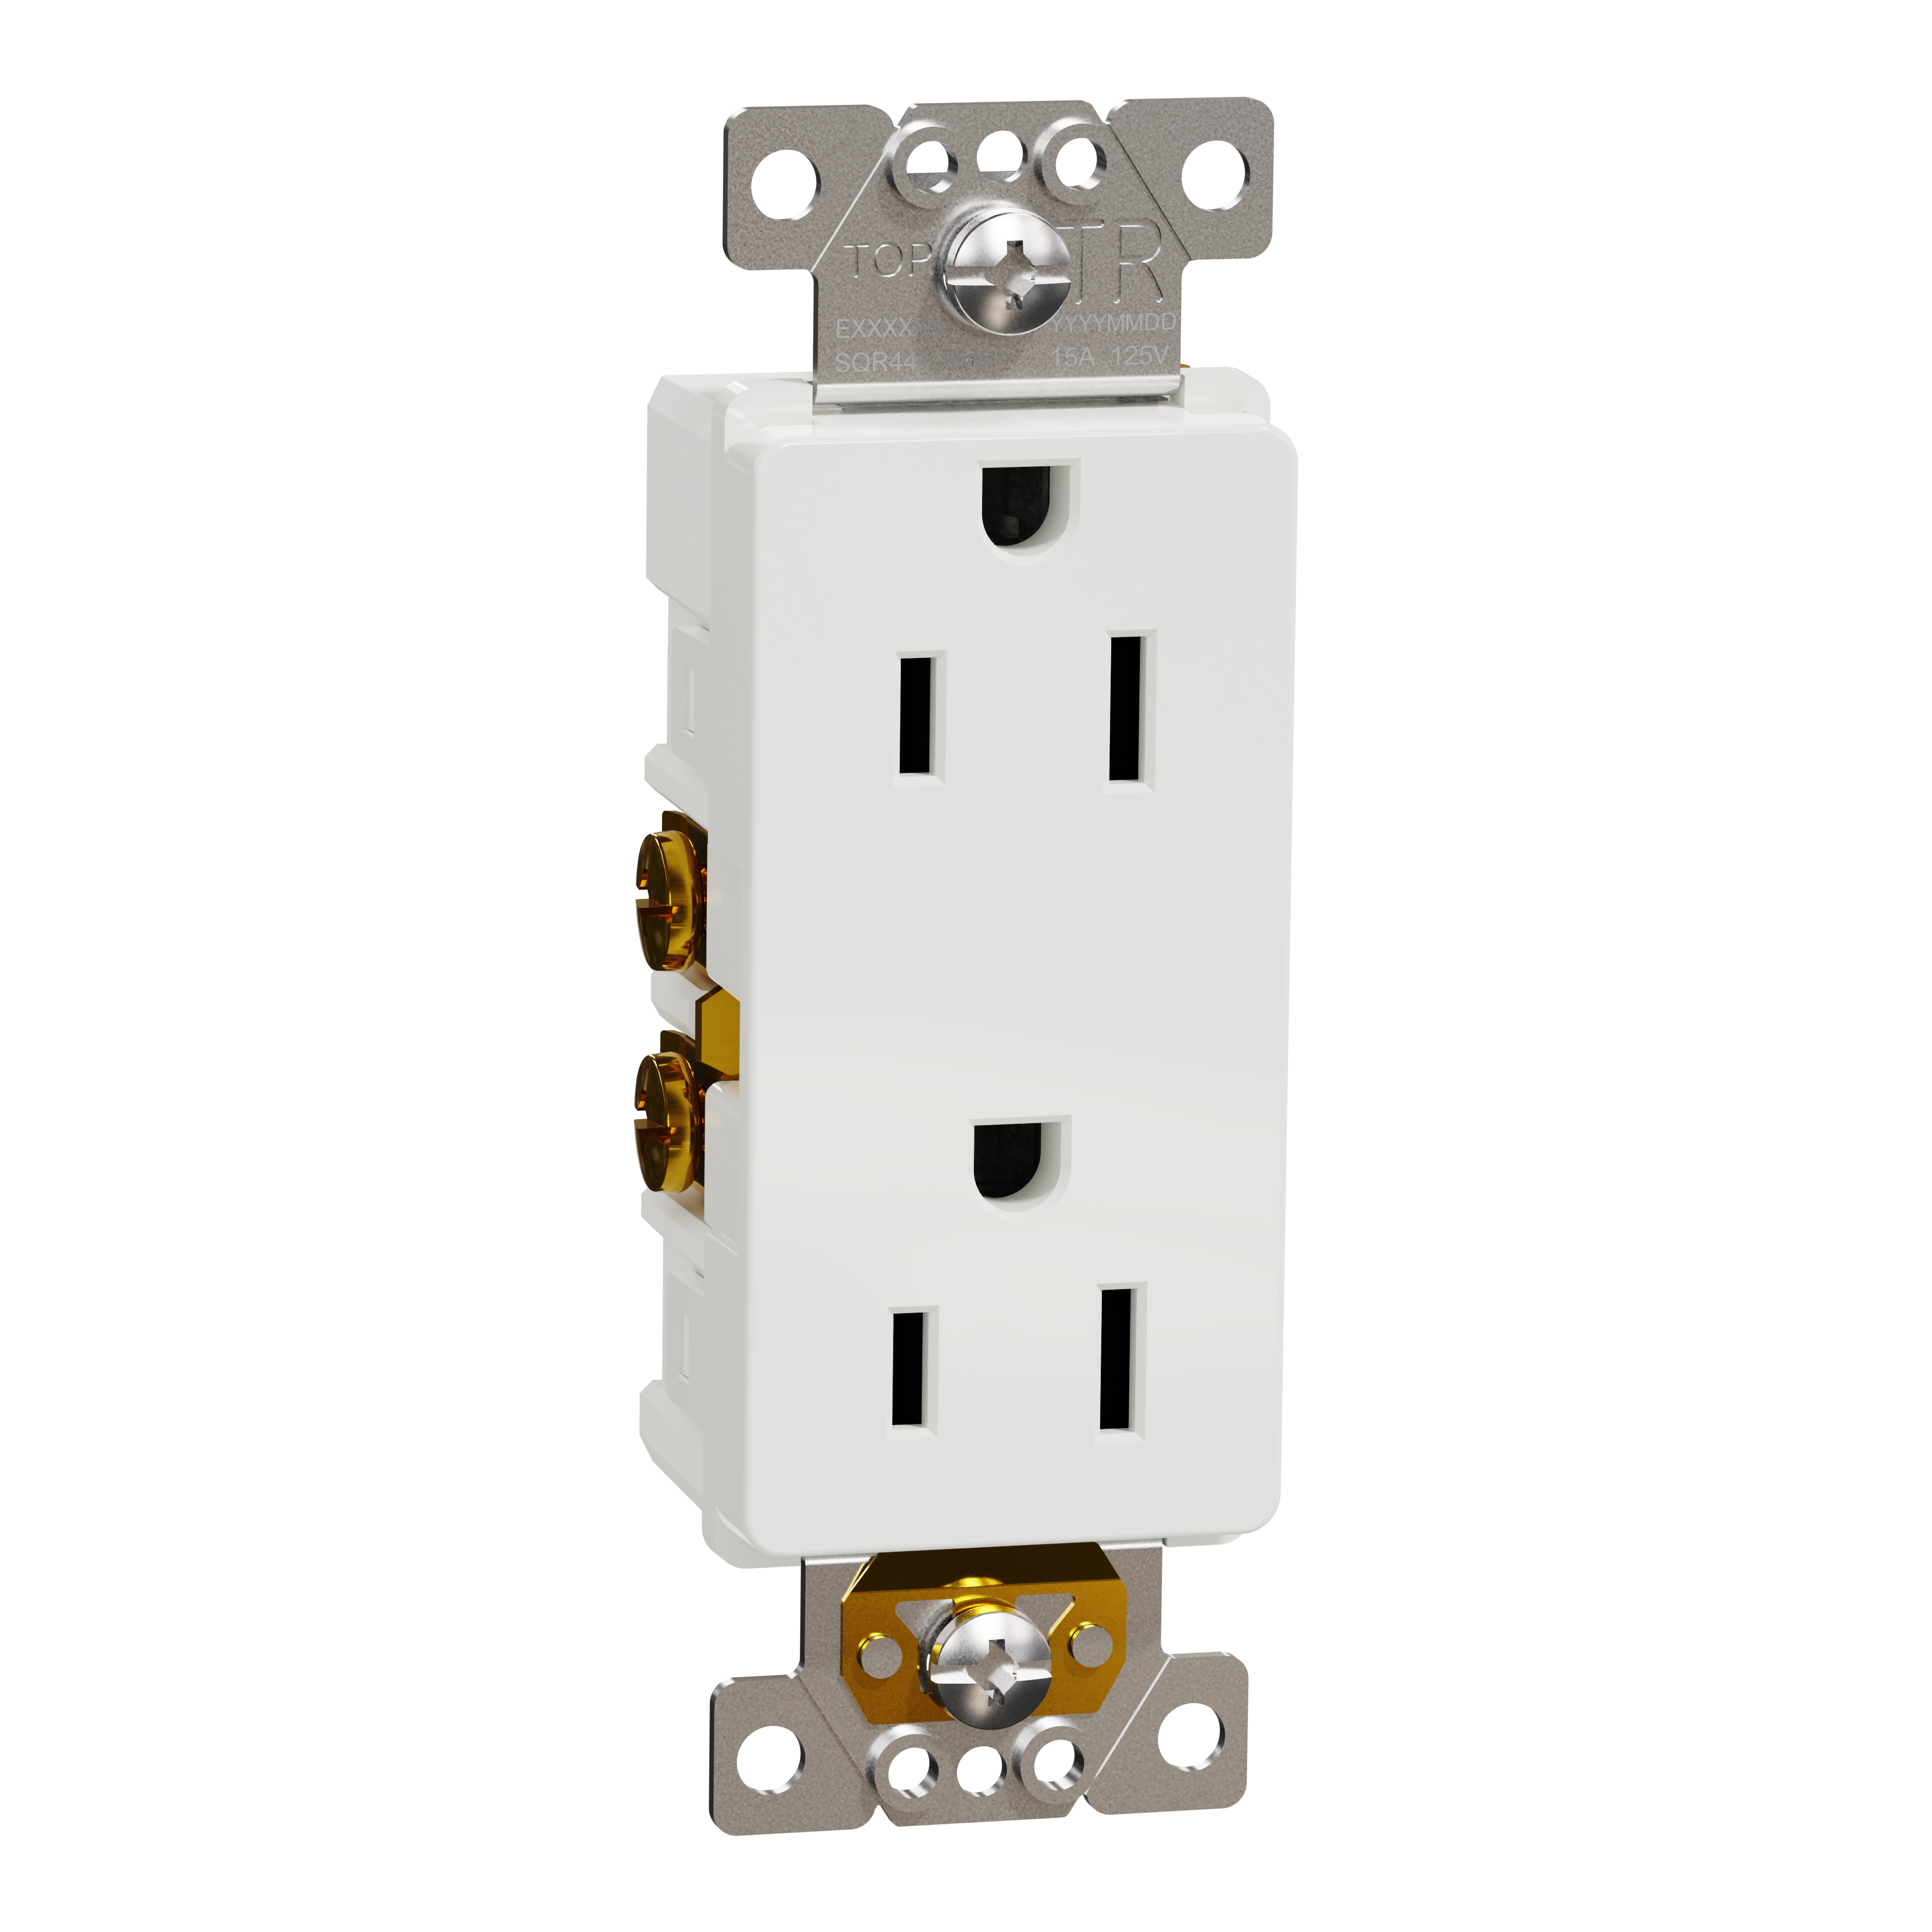 Socket-outlet, X Series, 15A, decorator, tamper resistant, residential, white, matte finish, 30 pcs